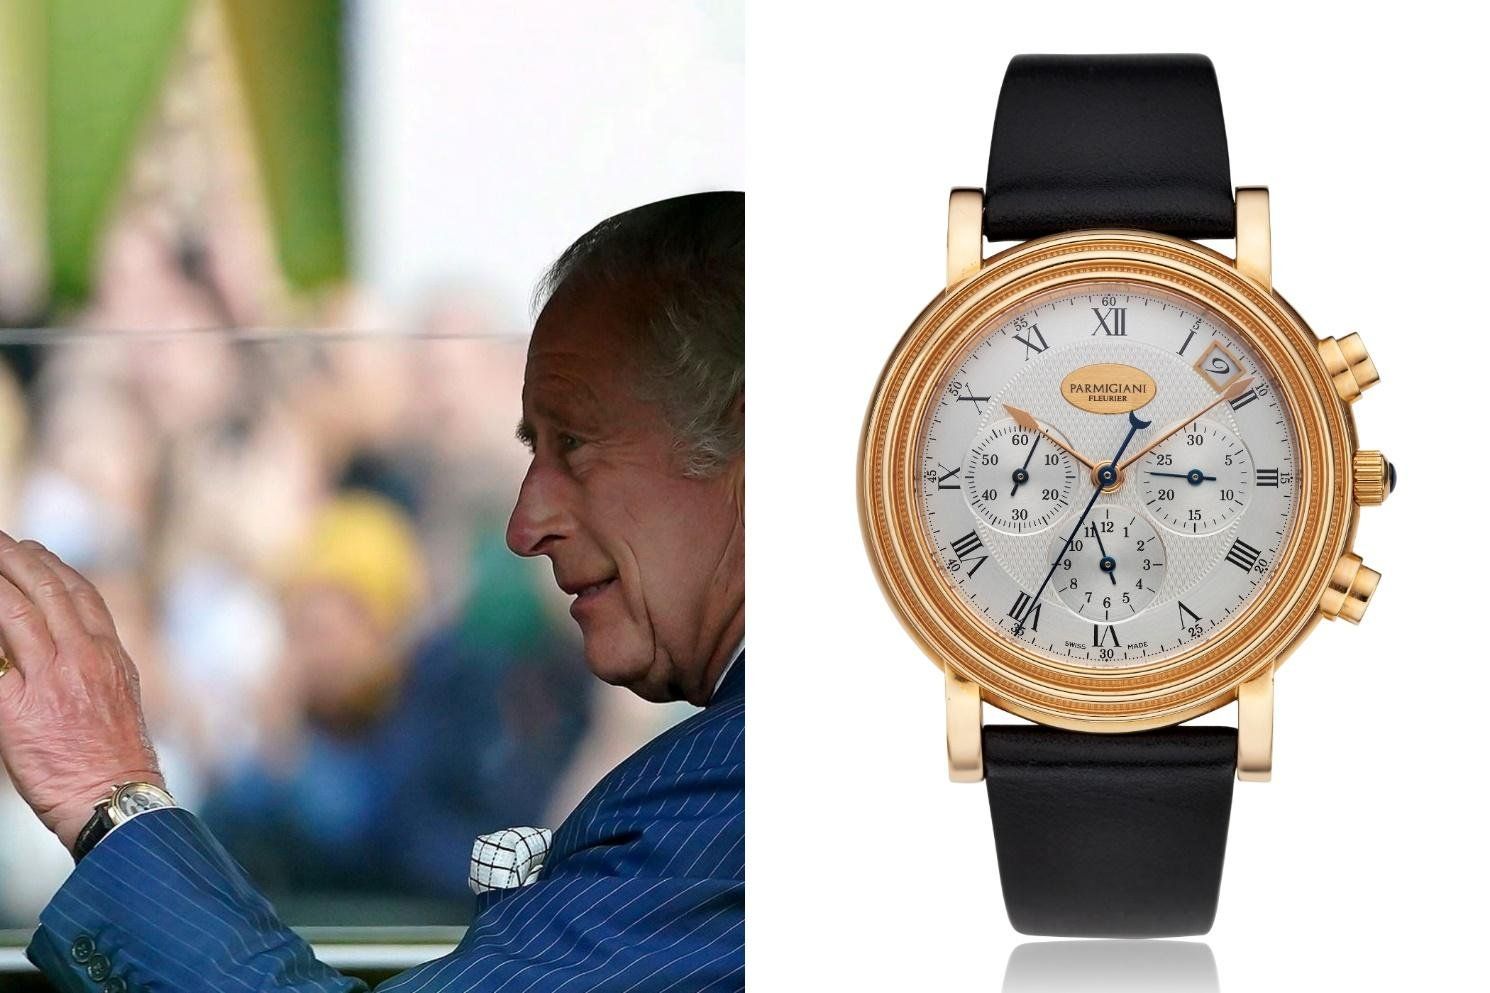 King Charles lll and his beloved Parmigiani Fleurier Toric Chronograph